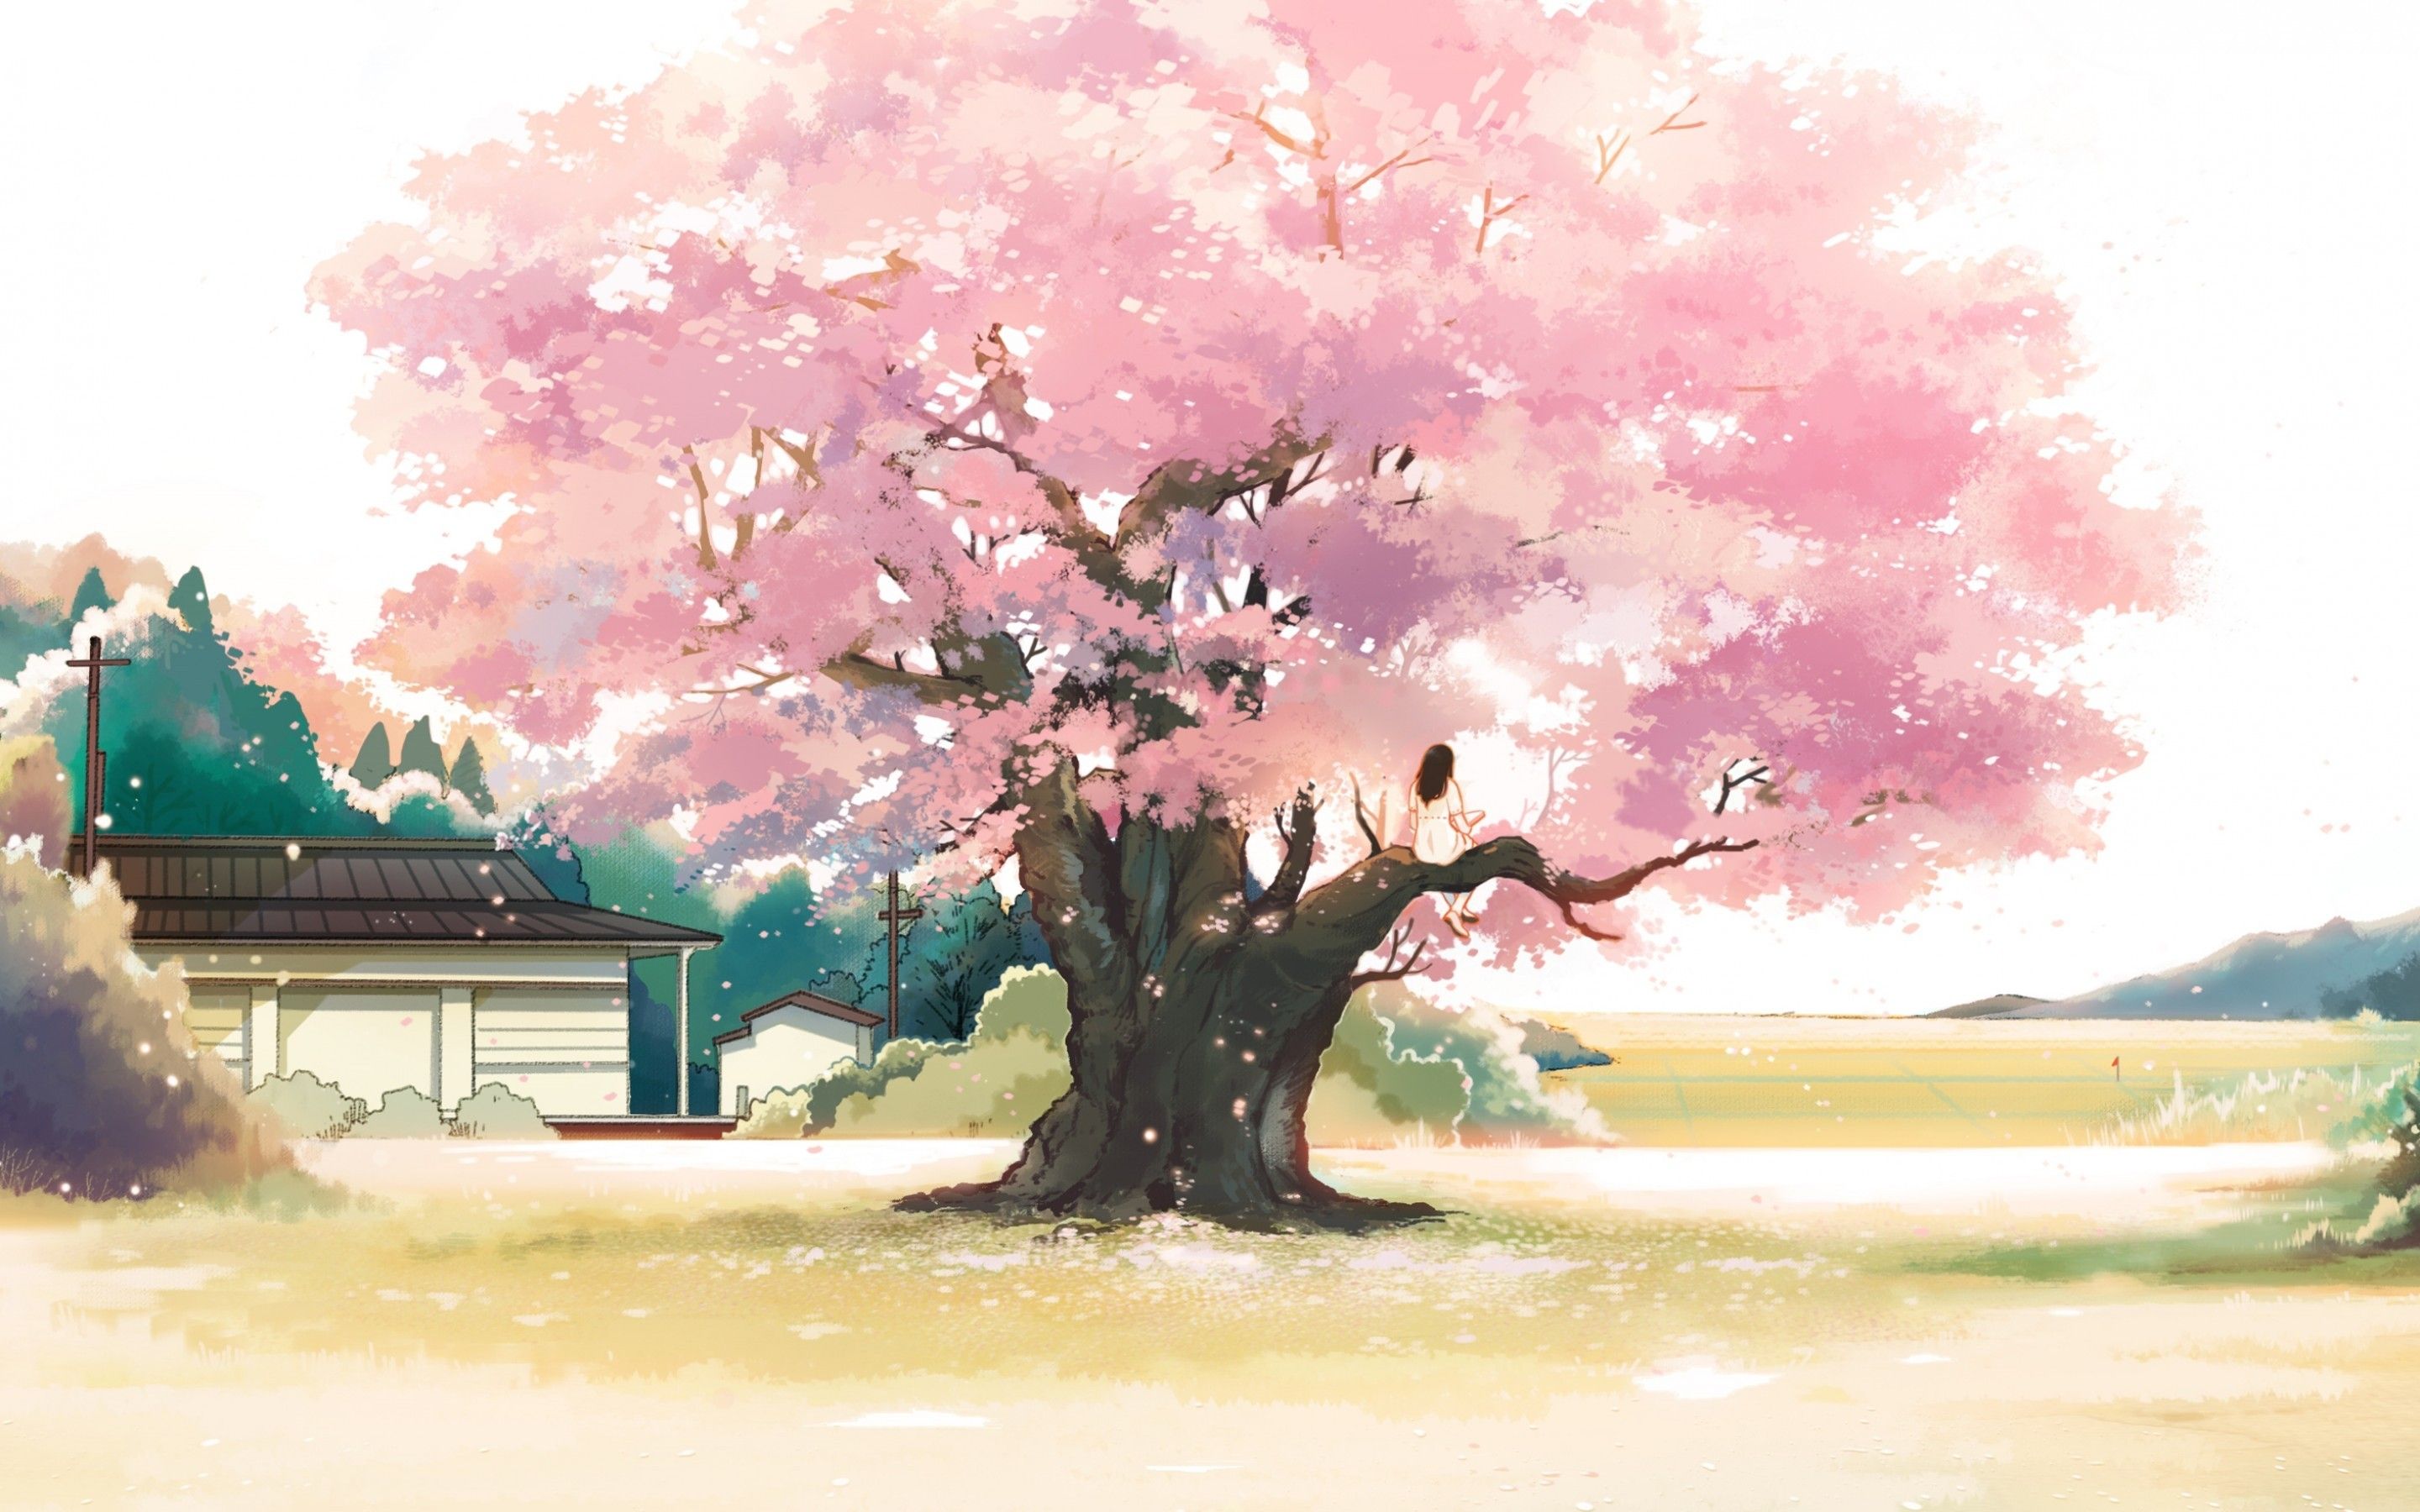 Anime-style drawing of pink cherry blossom trees on Craiyon